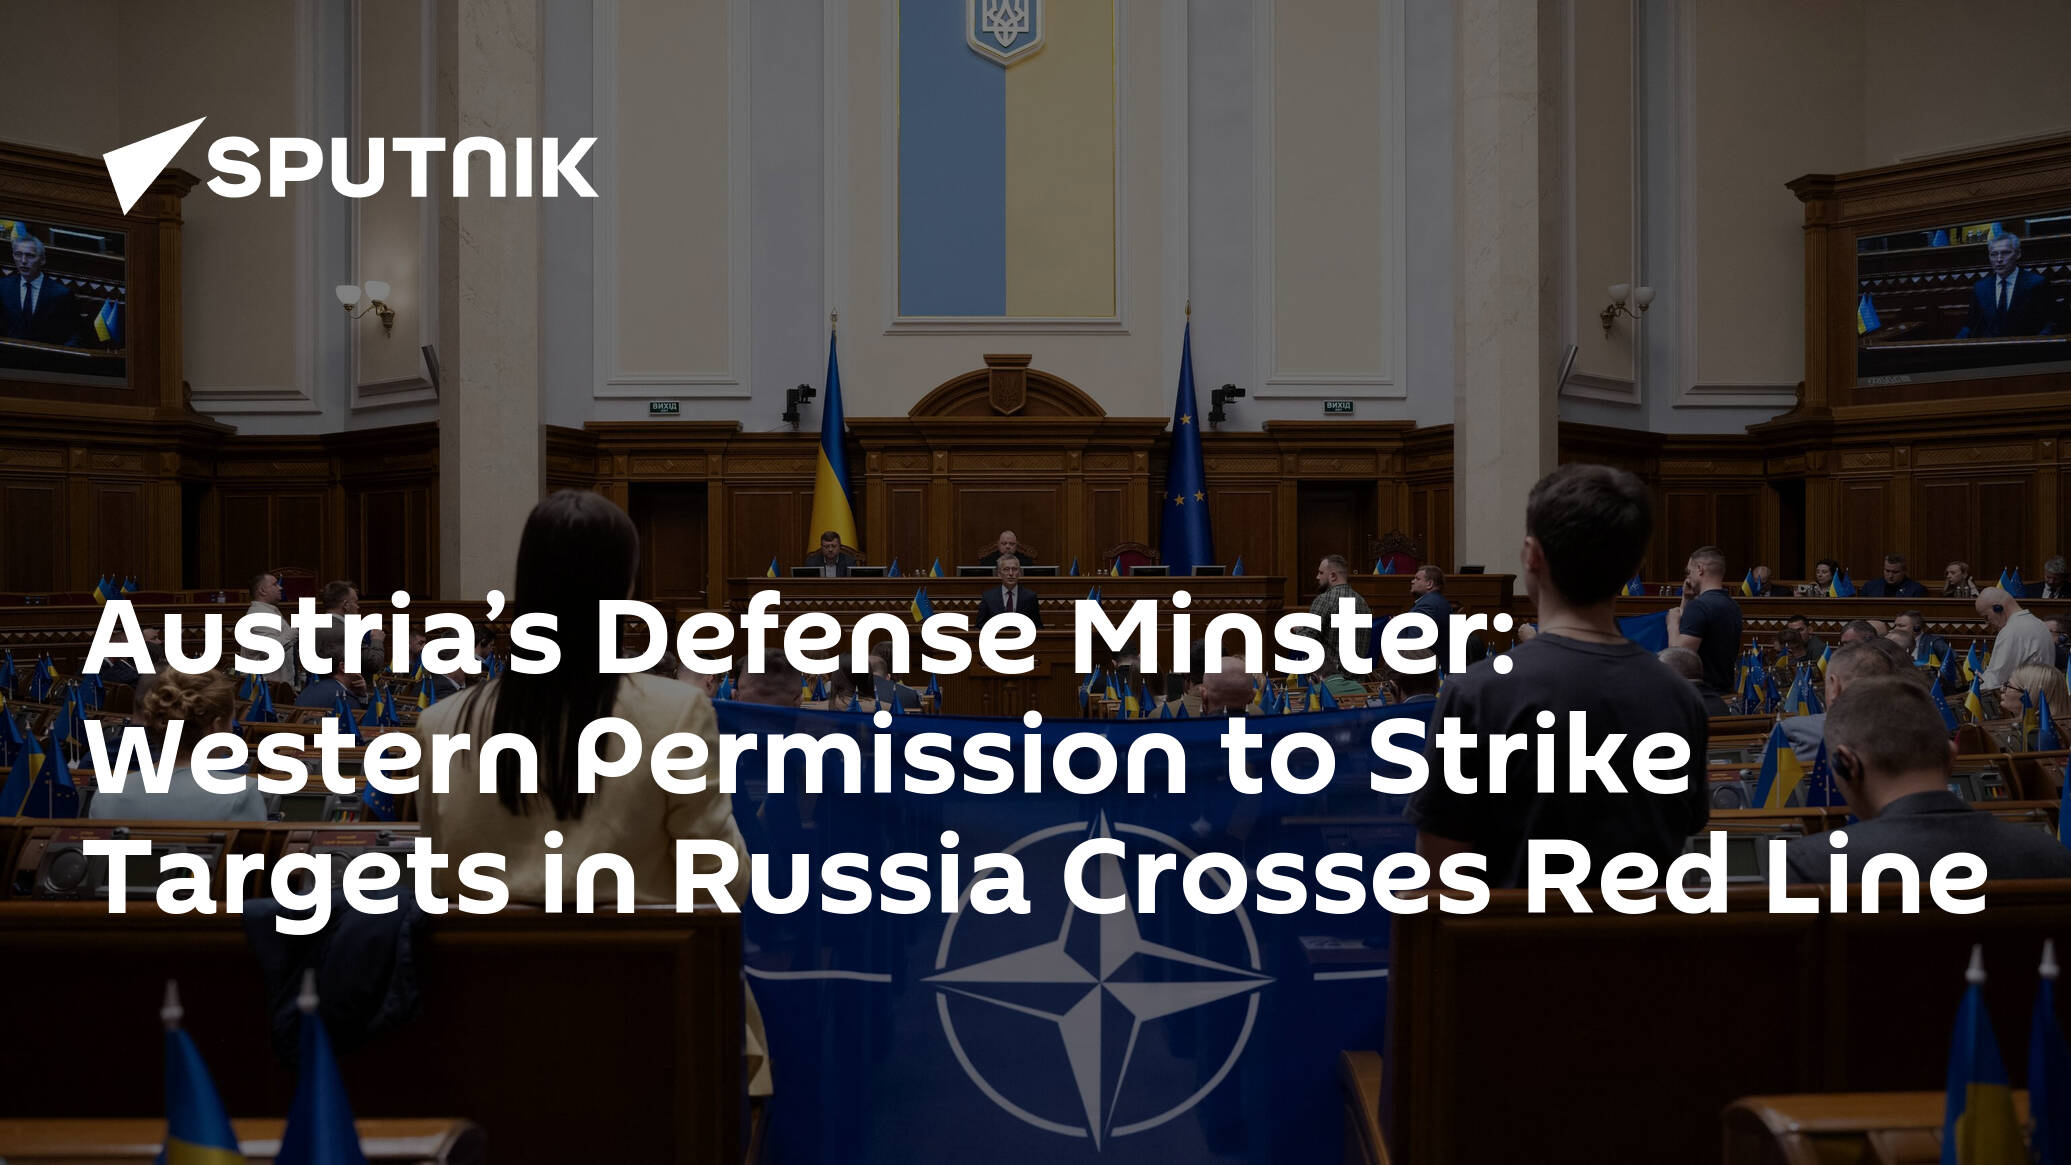 Austria’s Defense Minster: Western Permission to Strike Targets in Russia Crosses Red Line